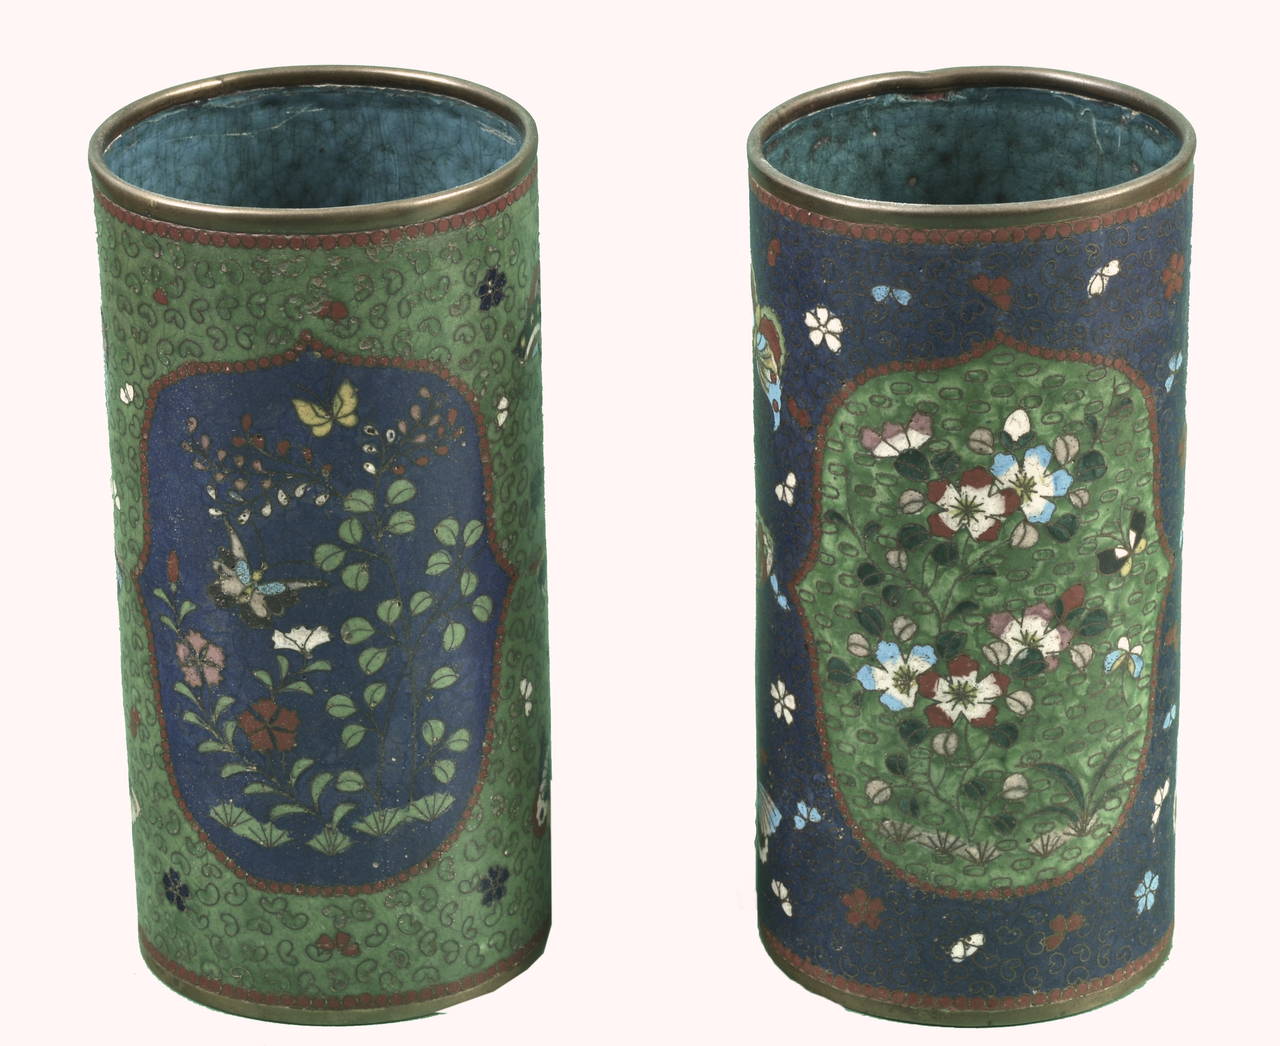 Pair of Chinese enamel on copper cylindrical vases.
Panelled with floral motif on butterflies field.
Blue turquoise enamel interior.
19th century.
Dimensions: Height 17 cm.
Diameter 8.3 cm.